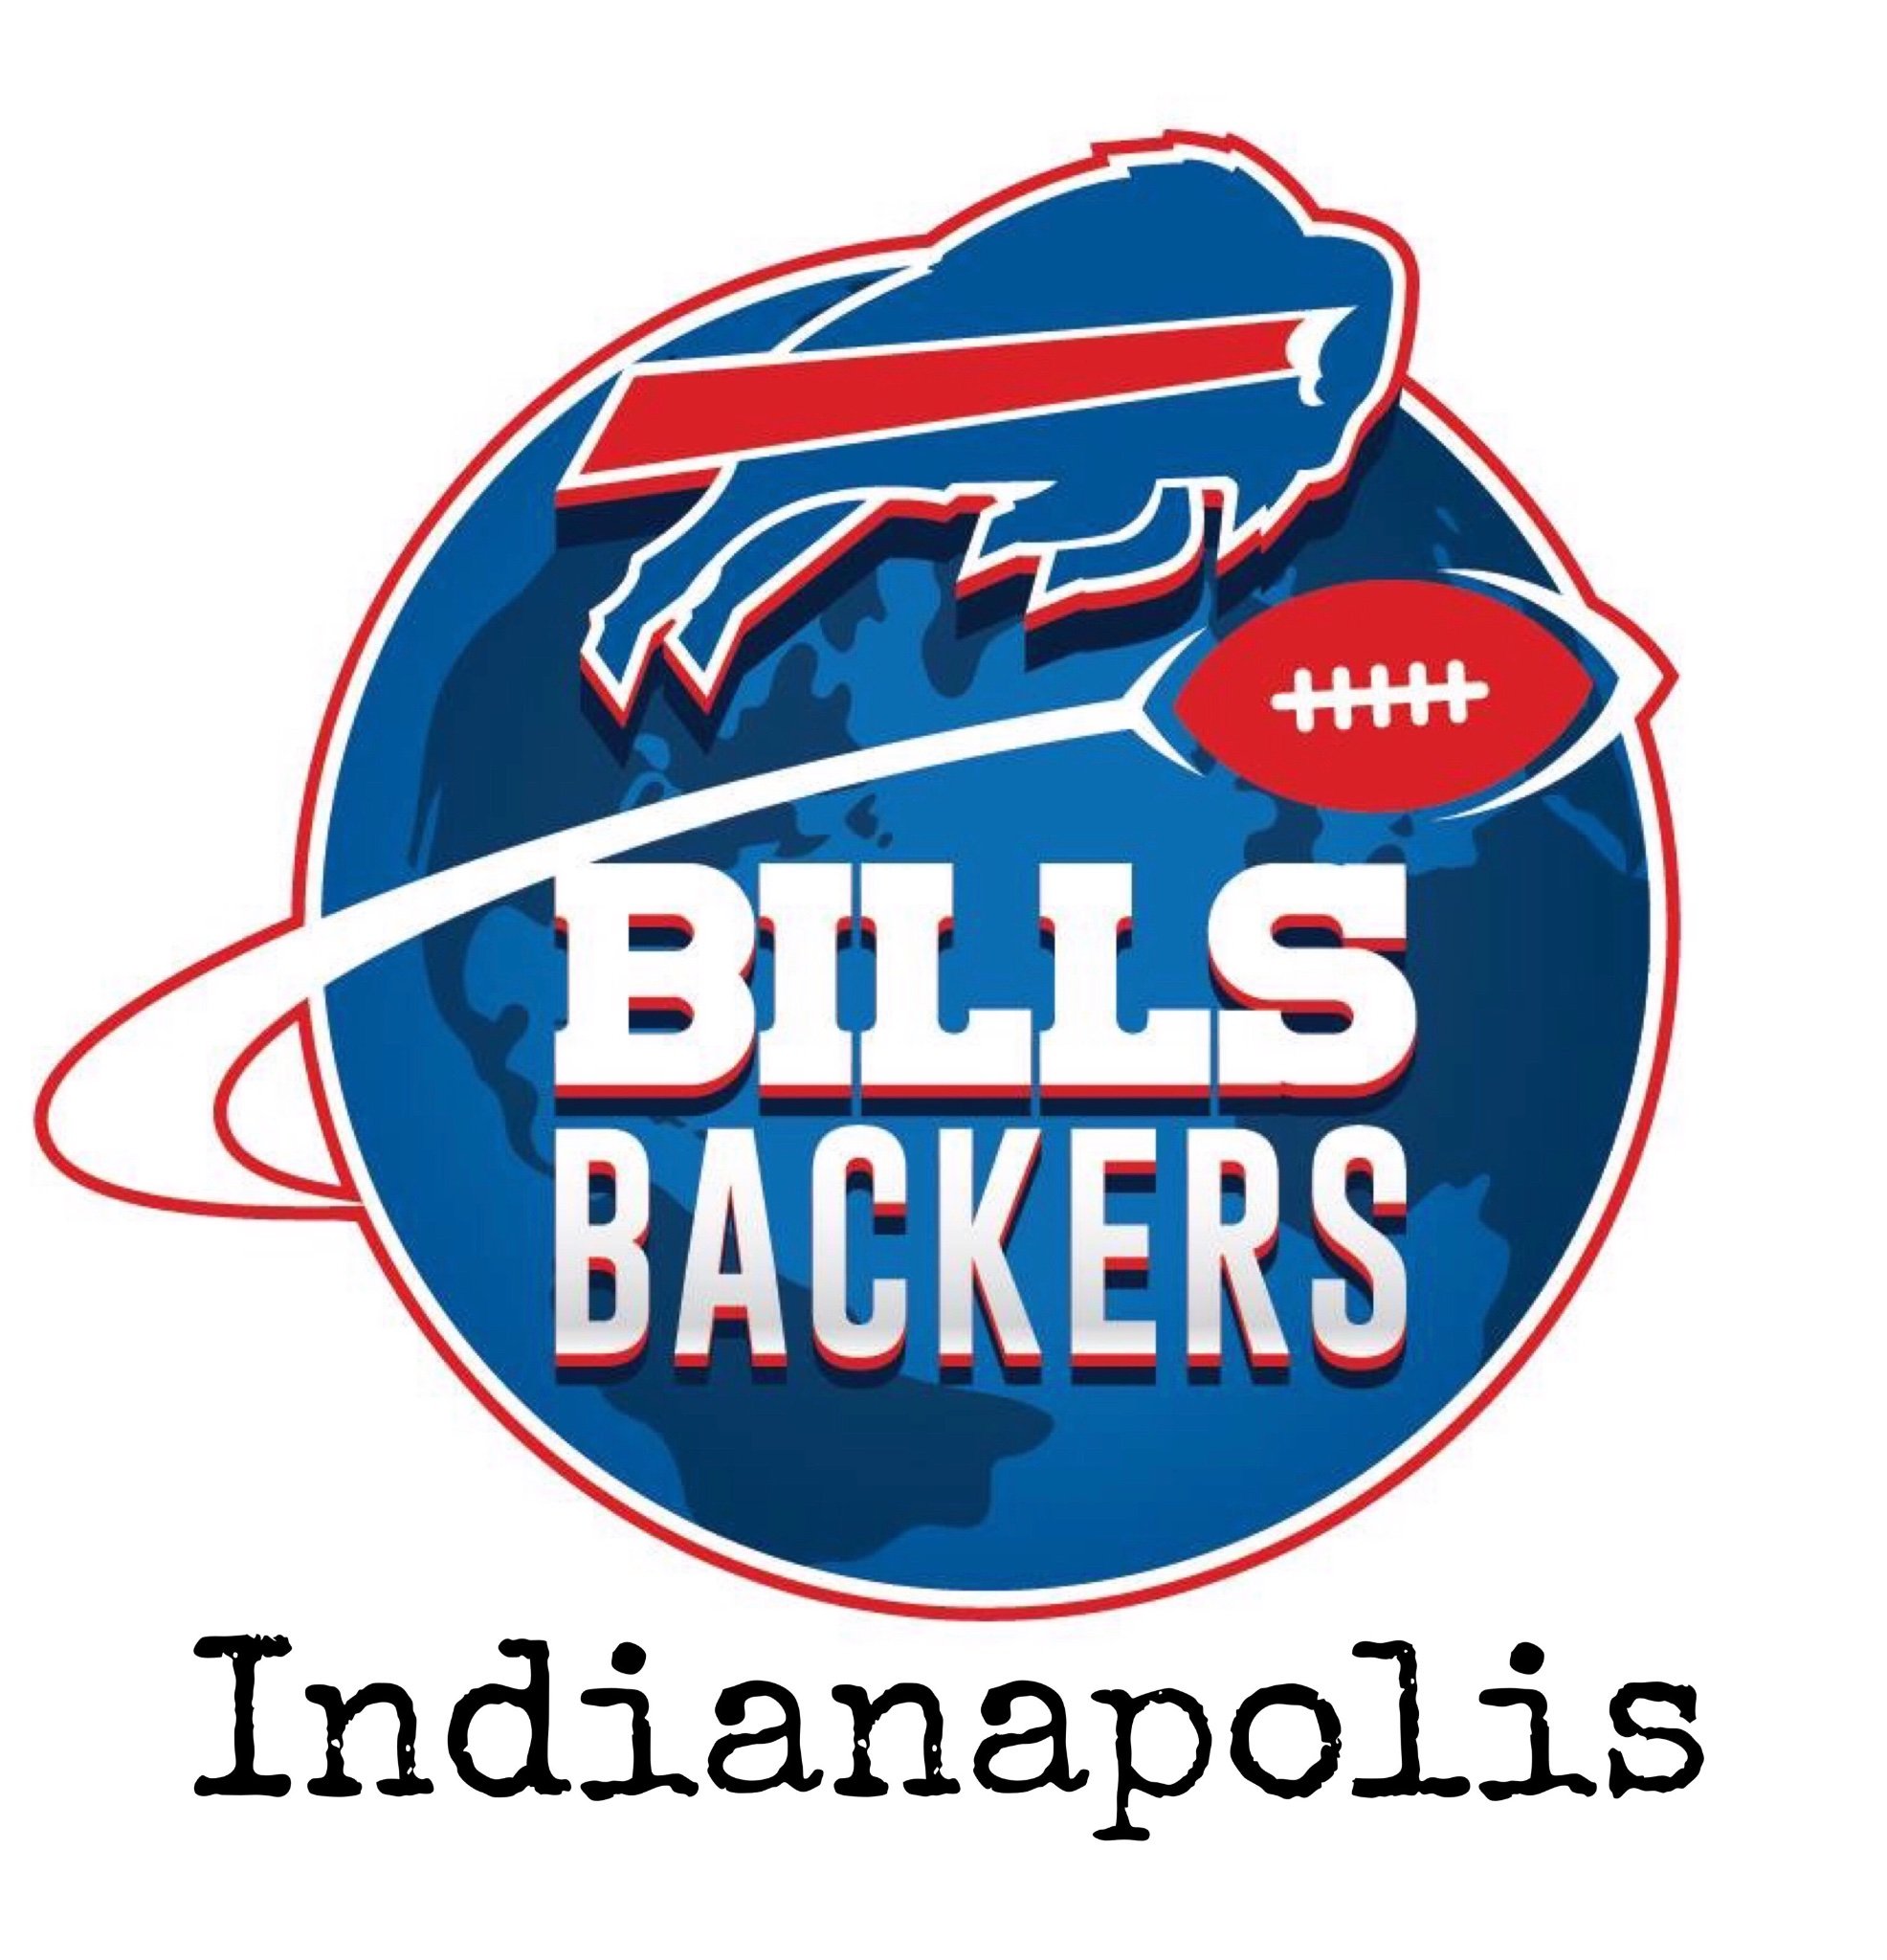 We are the original and official Indianapolis Bills Backers group. We are happy you are here! Go Bills!